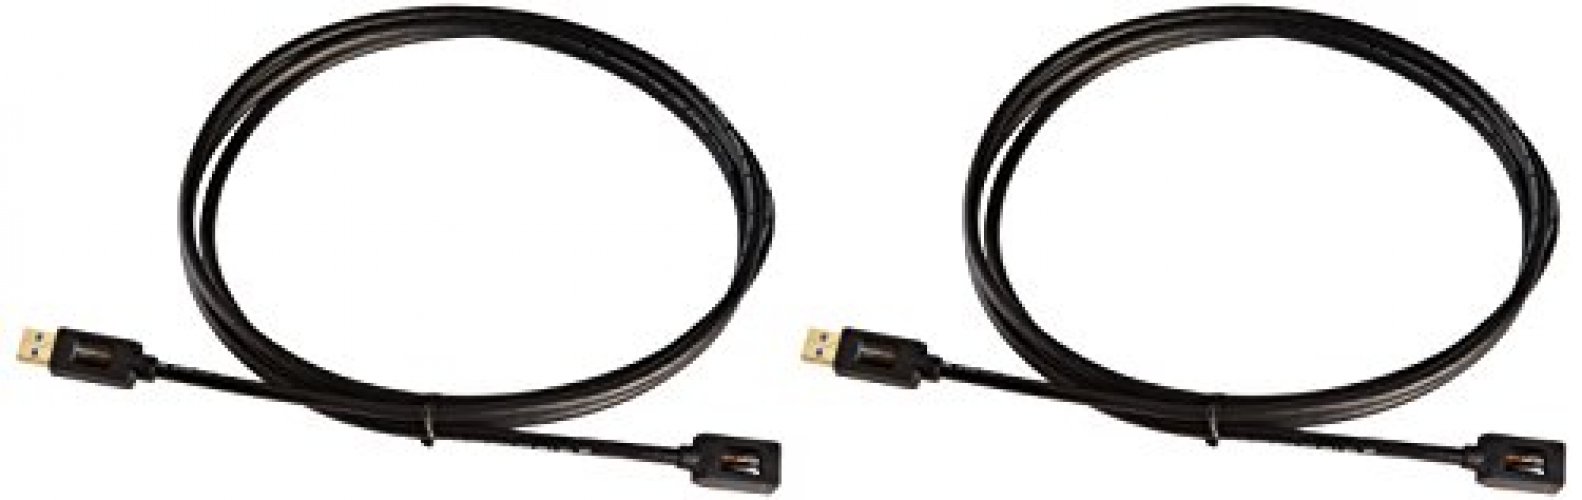 Basics 2-Pack USB-A 3.0 Extension Cable, 4.8Gbps High-Speed, Male to  Female Gold-Plated Connectors, 6 Foot, Black